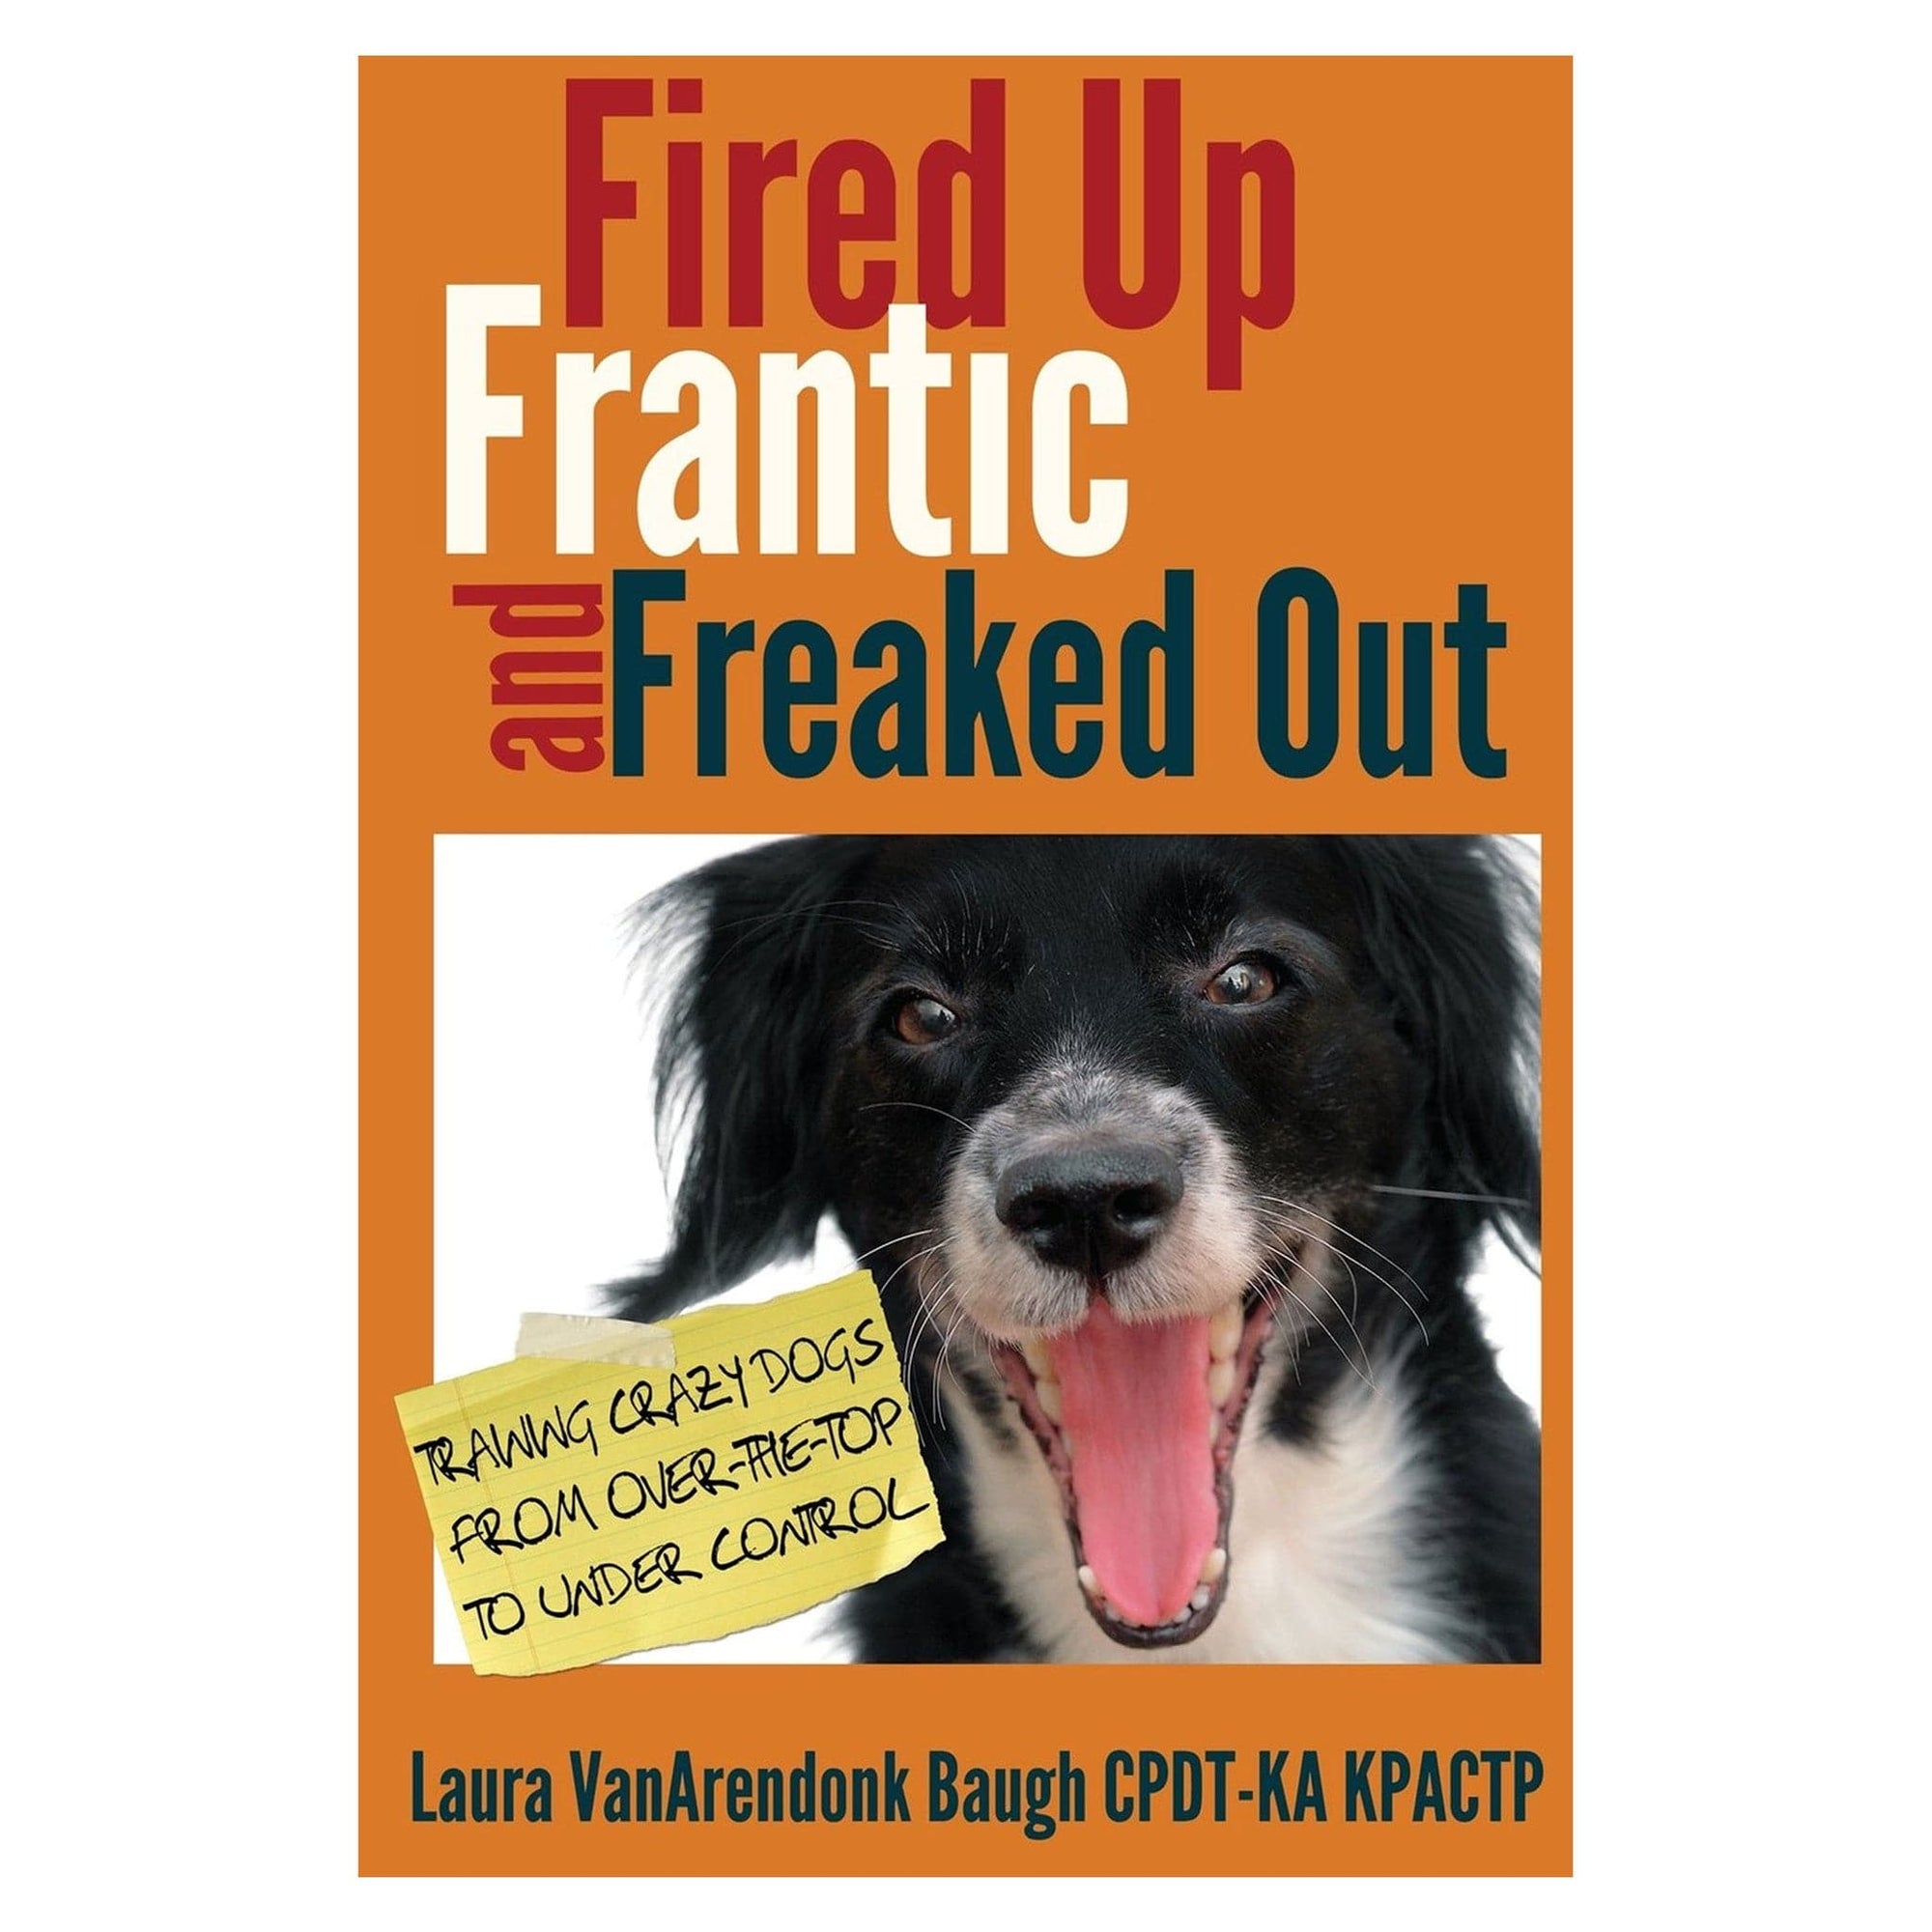 Fired Up, Frantic, and Freaked Out by Laura VanArendonk Baugh EXPO24